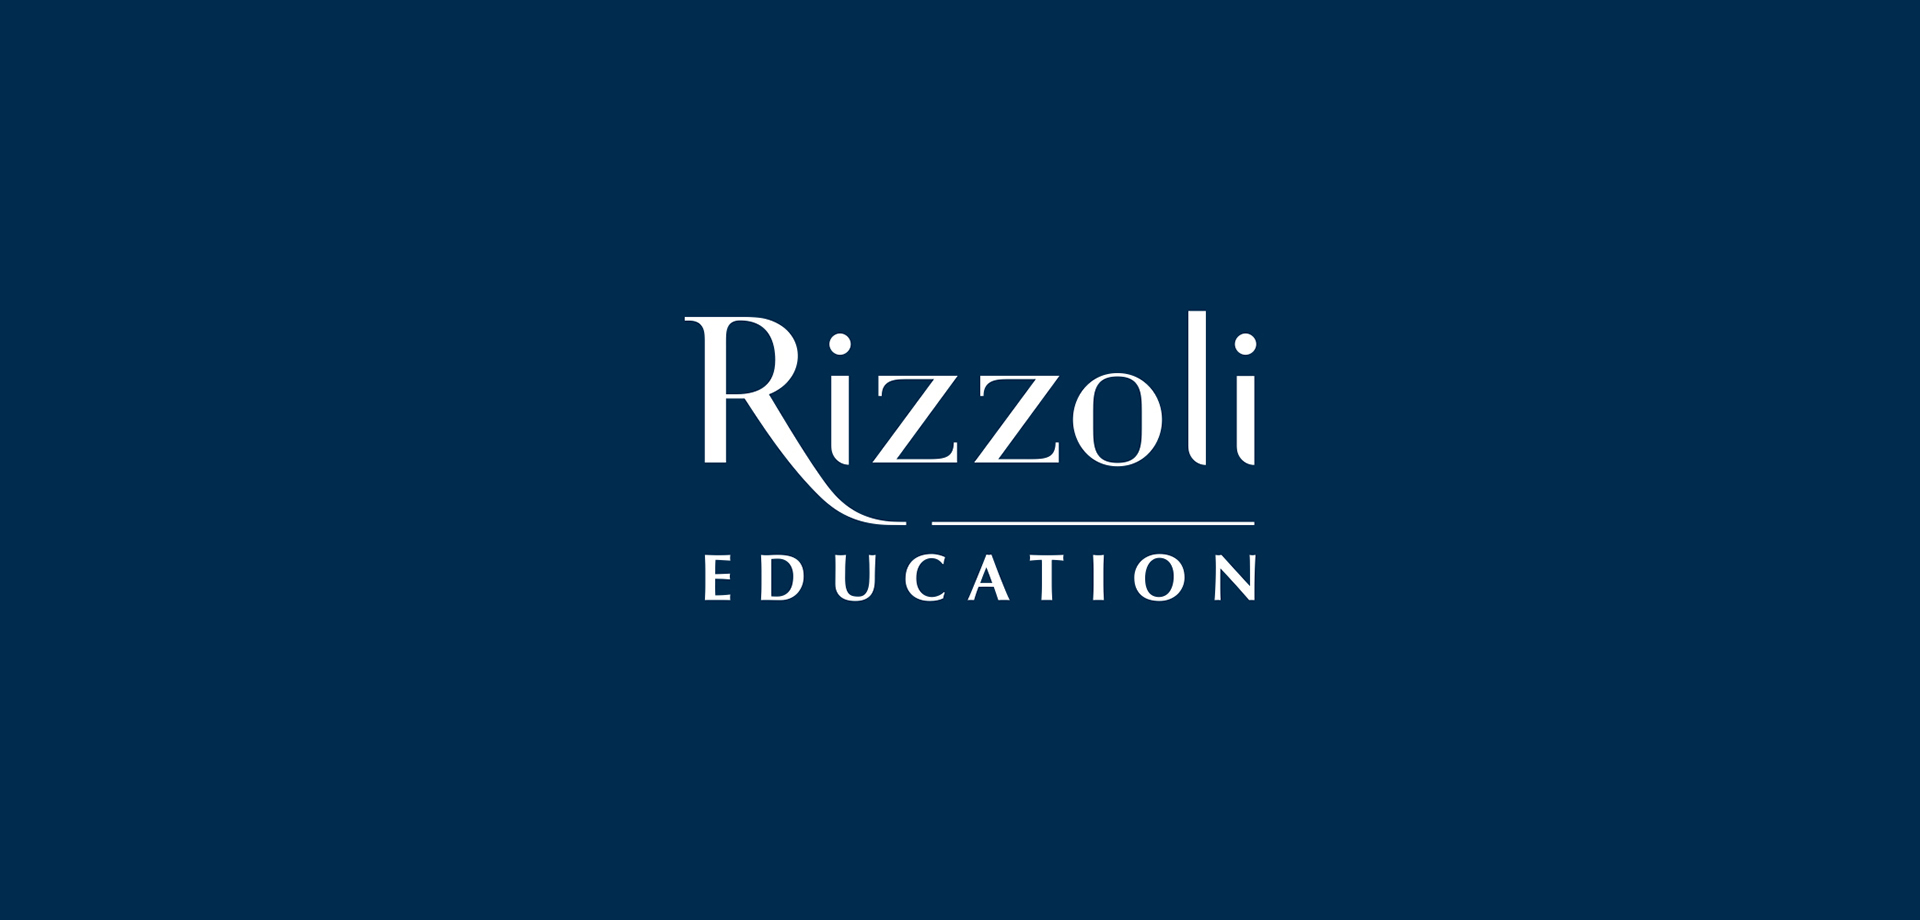 Covers and guidalines SS1-SS2 - Rizzoli Education